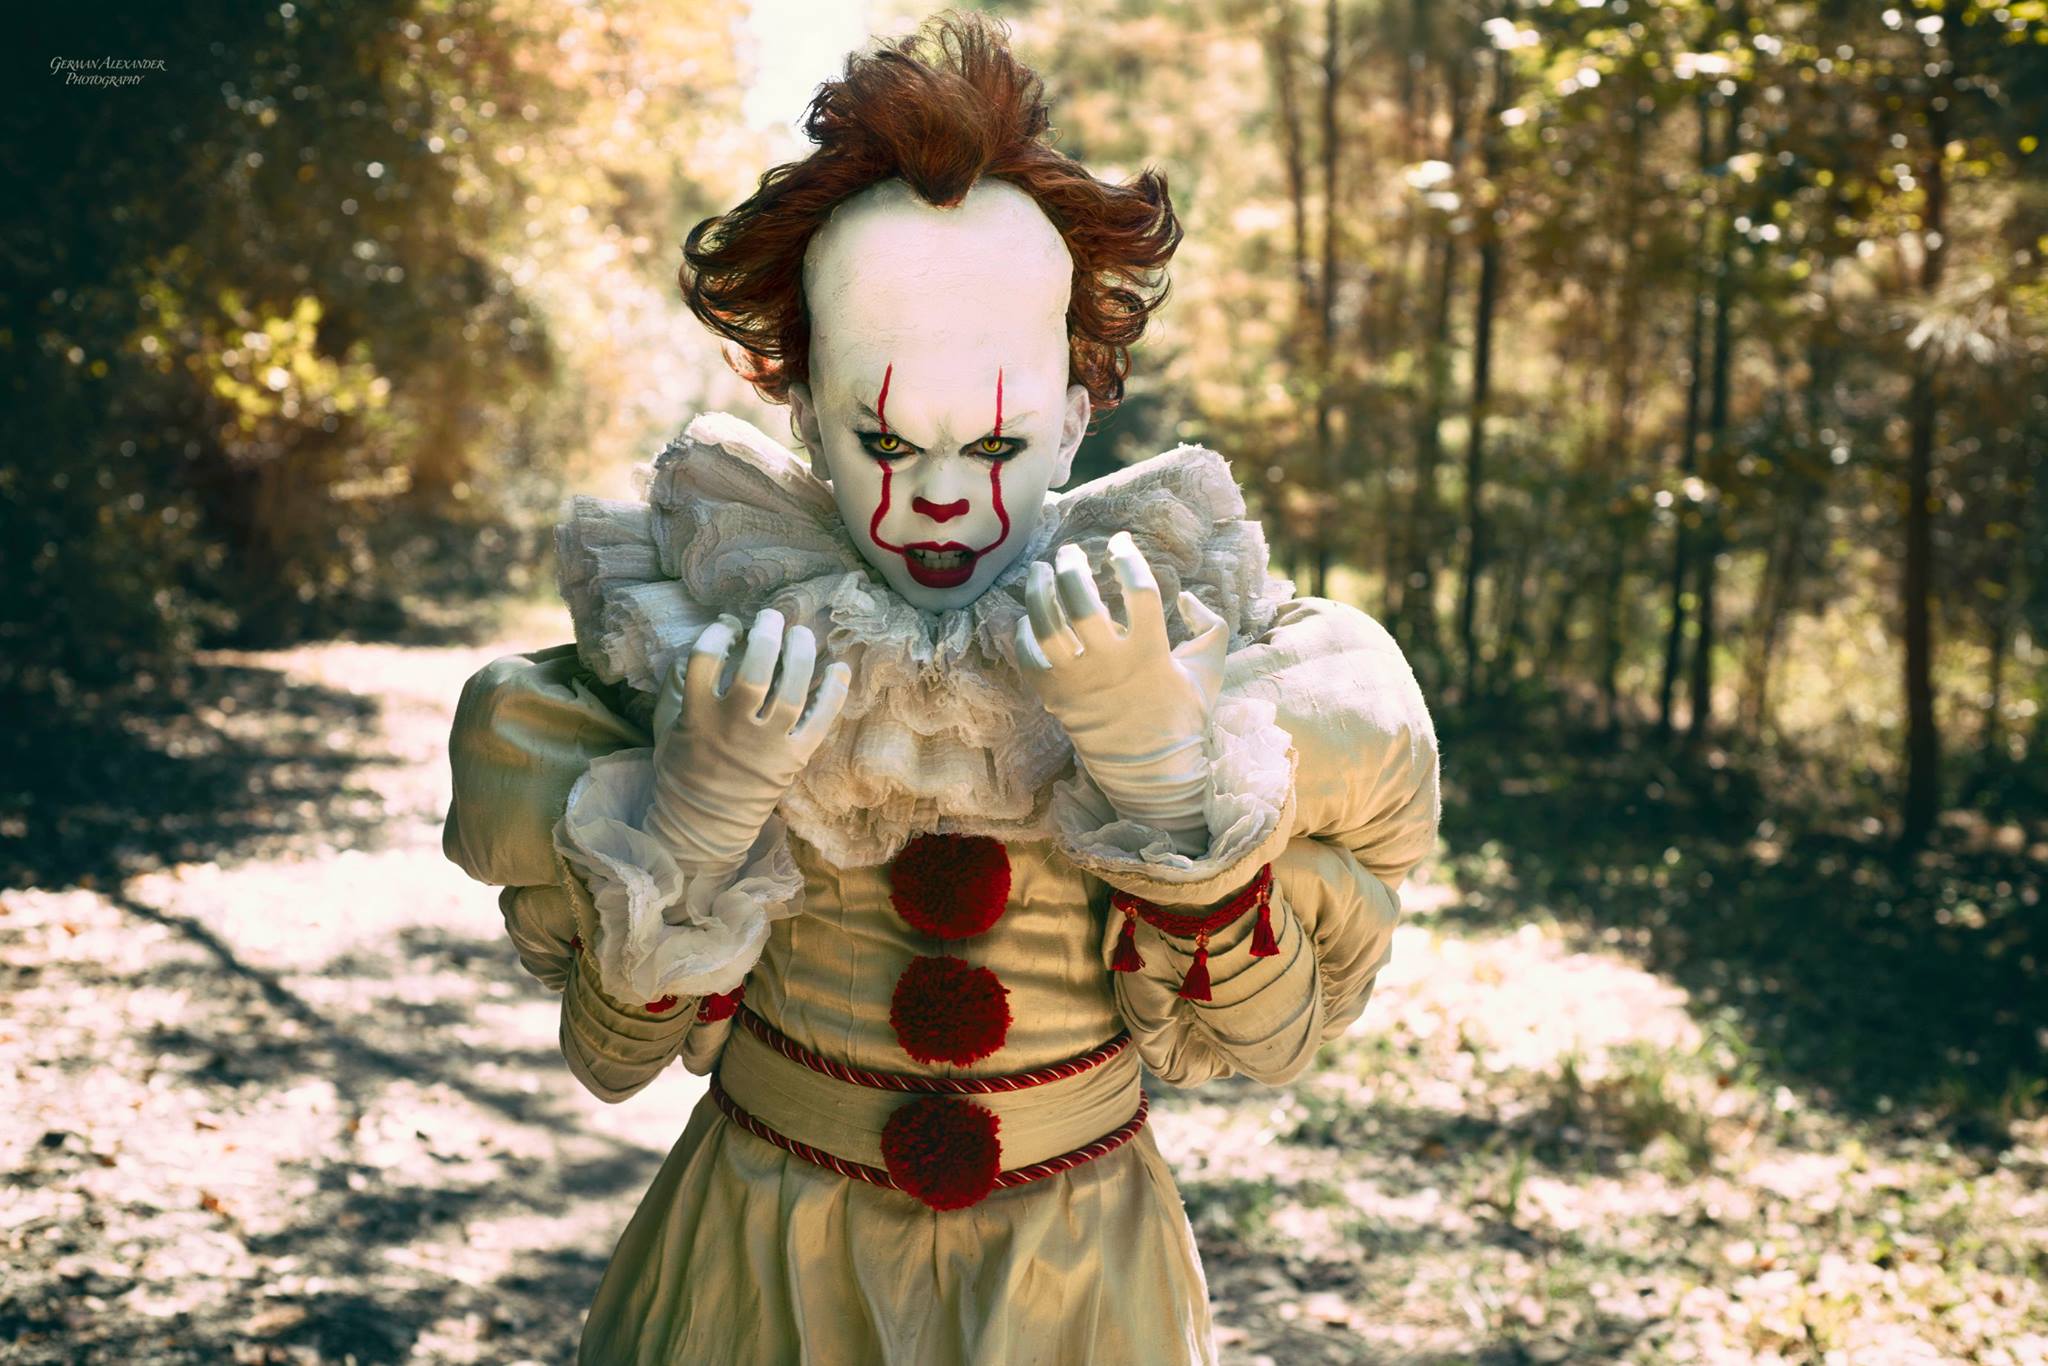 Houston's reigning cosplay prince dresses as Pennywise the clown in new photoshoot ...